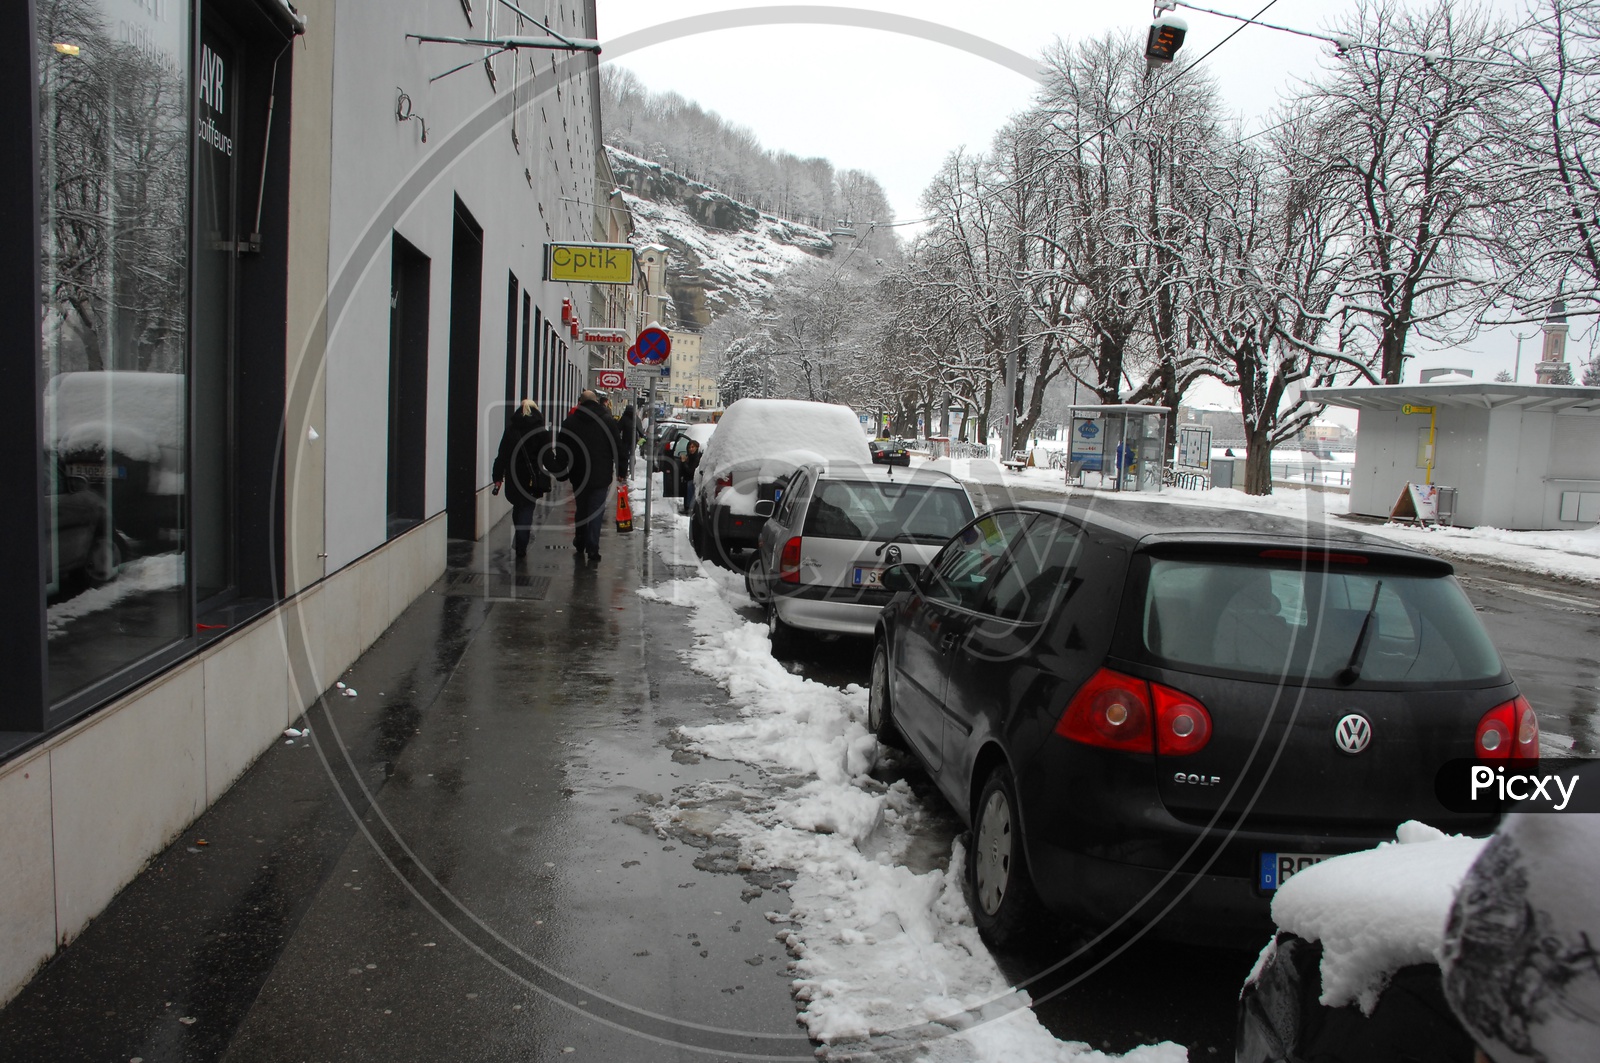 Cars parked alongside the road covered with snow